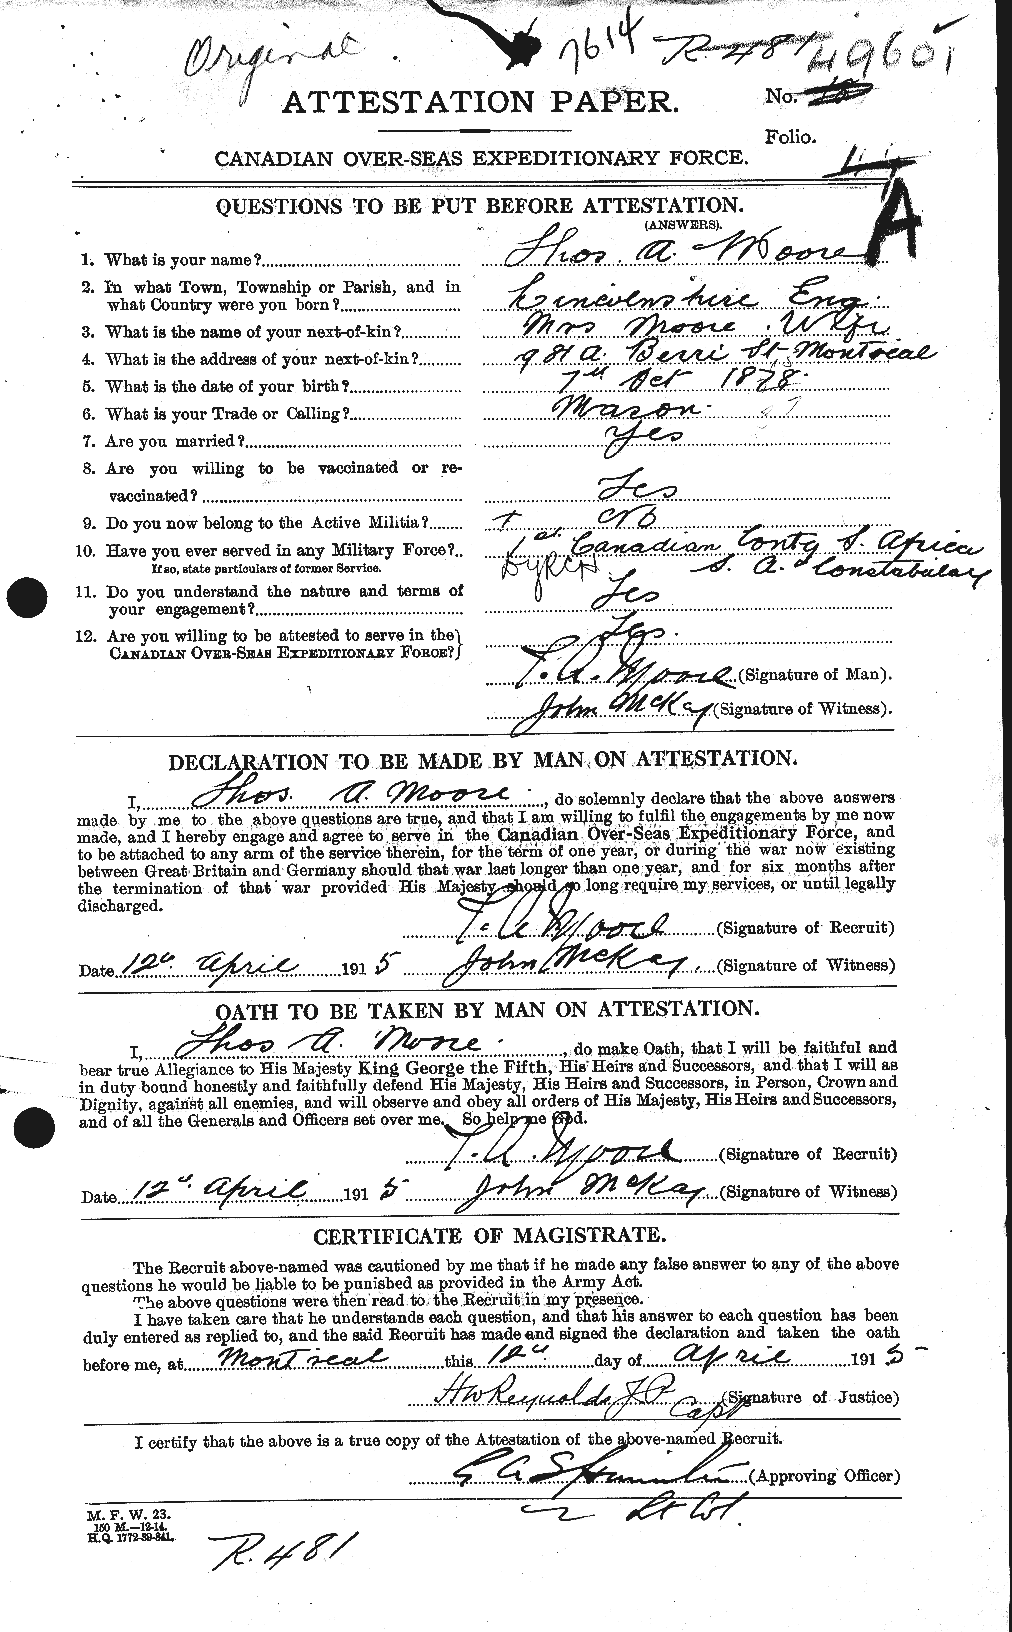 Personnel Records of the First World War - CEF 505637a